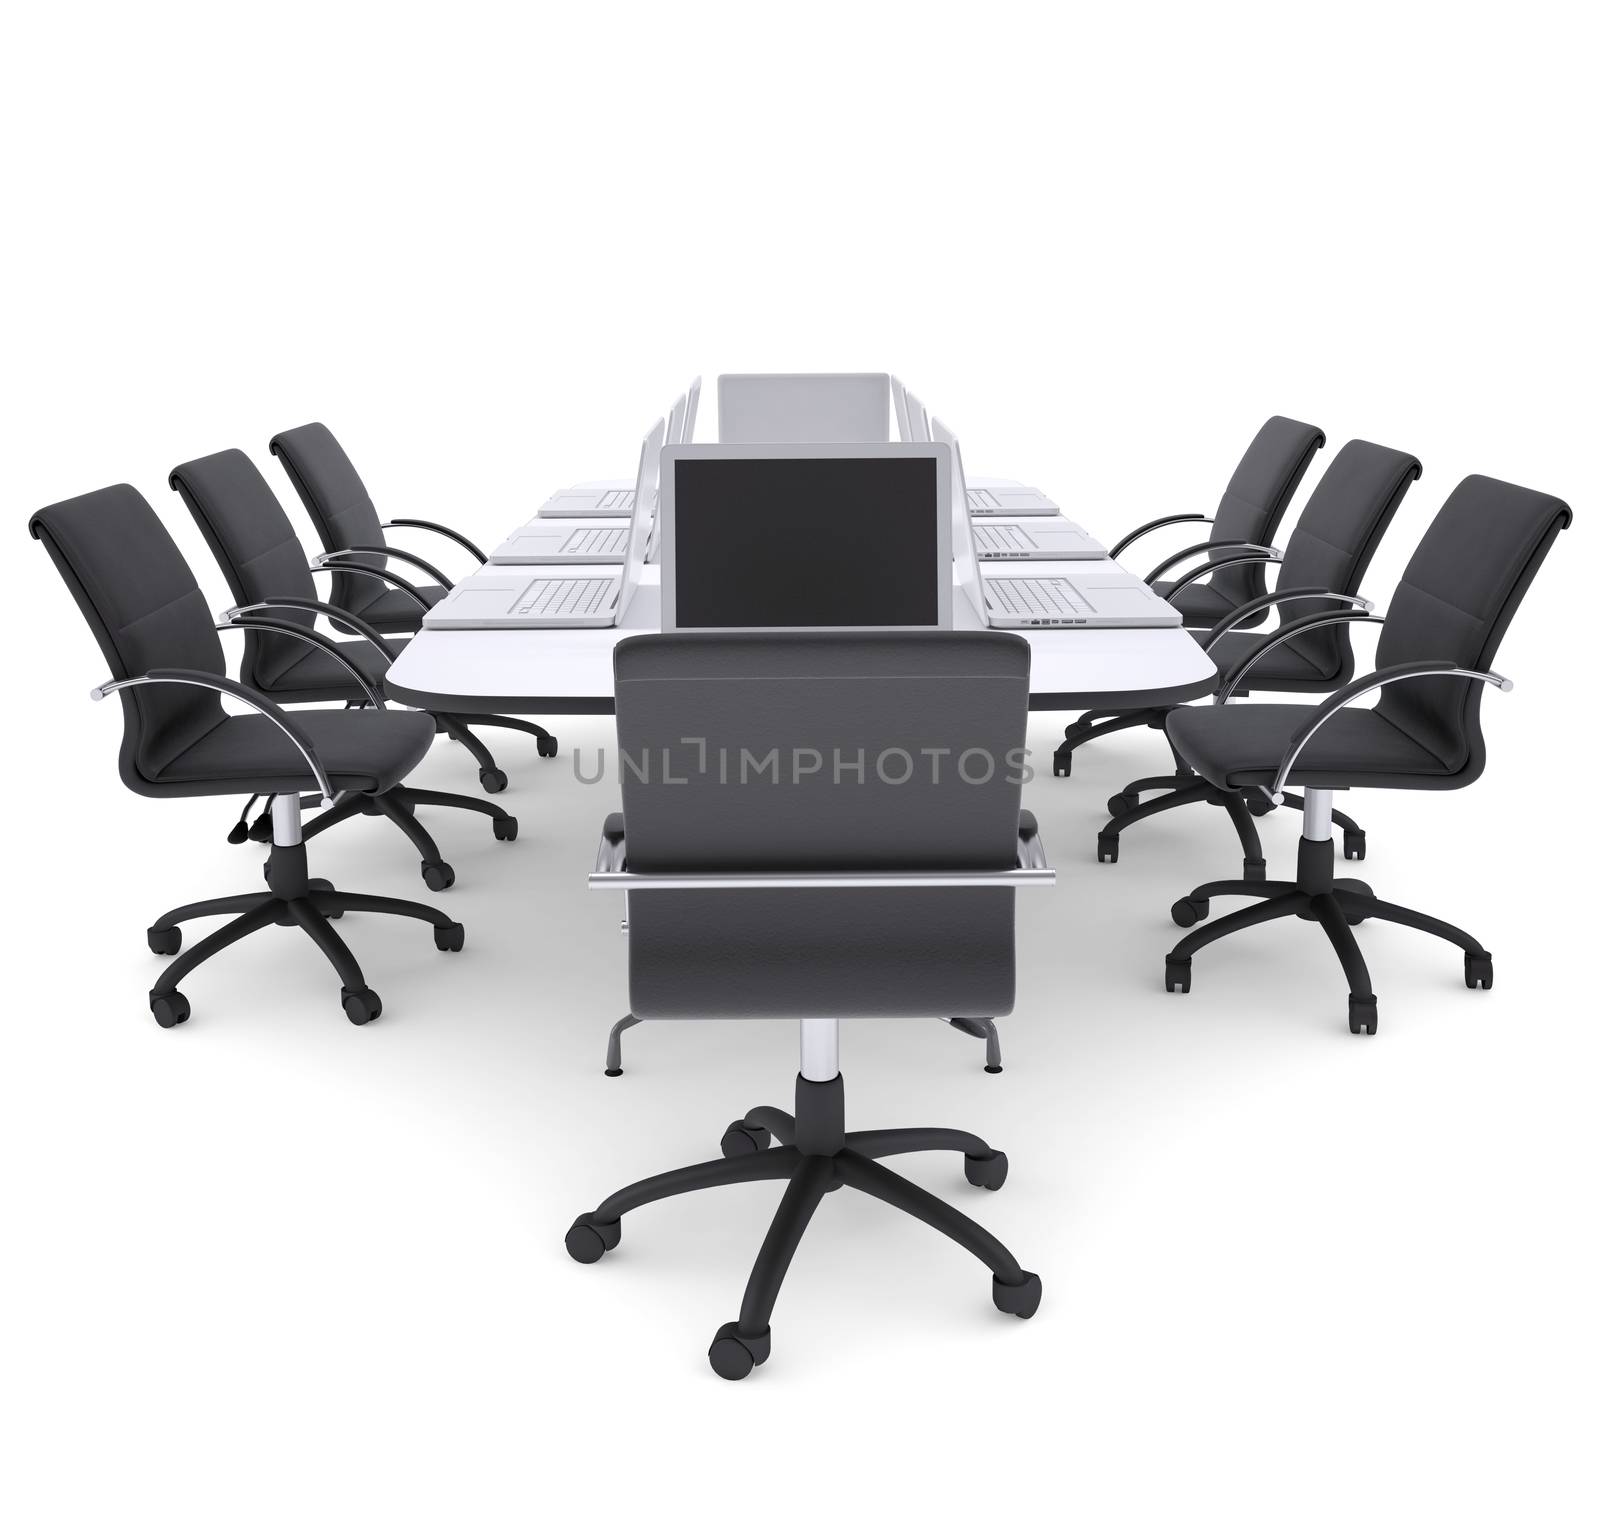 Laptops on the office round table and chairs by cherezoff